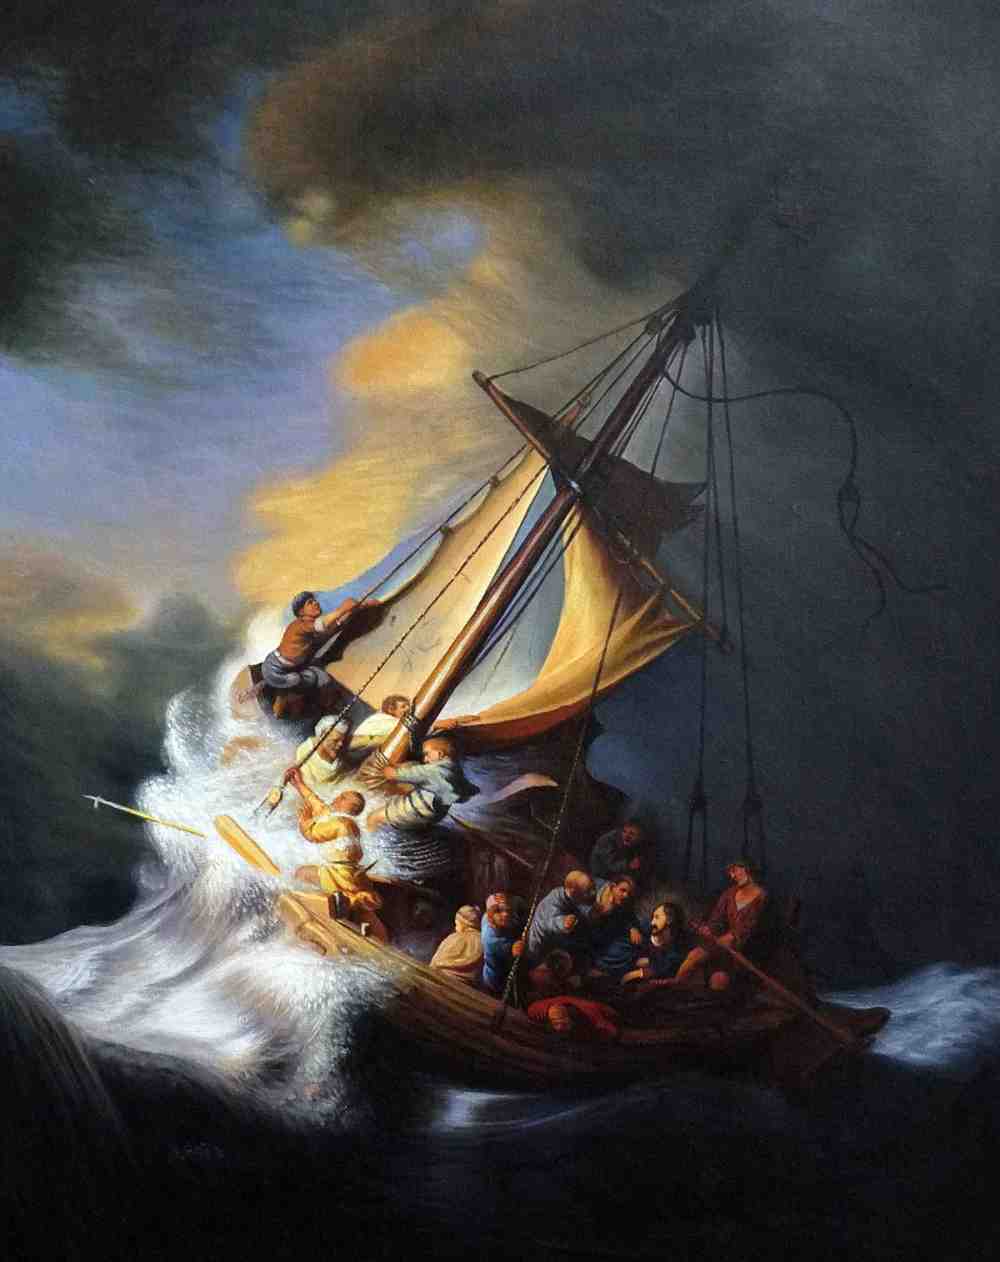 Boat on stormy sea